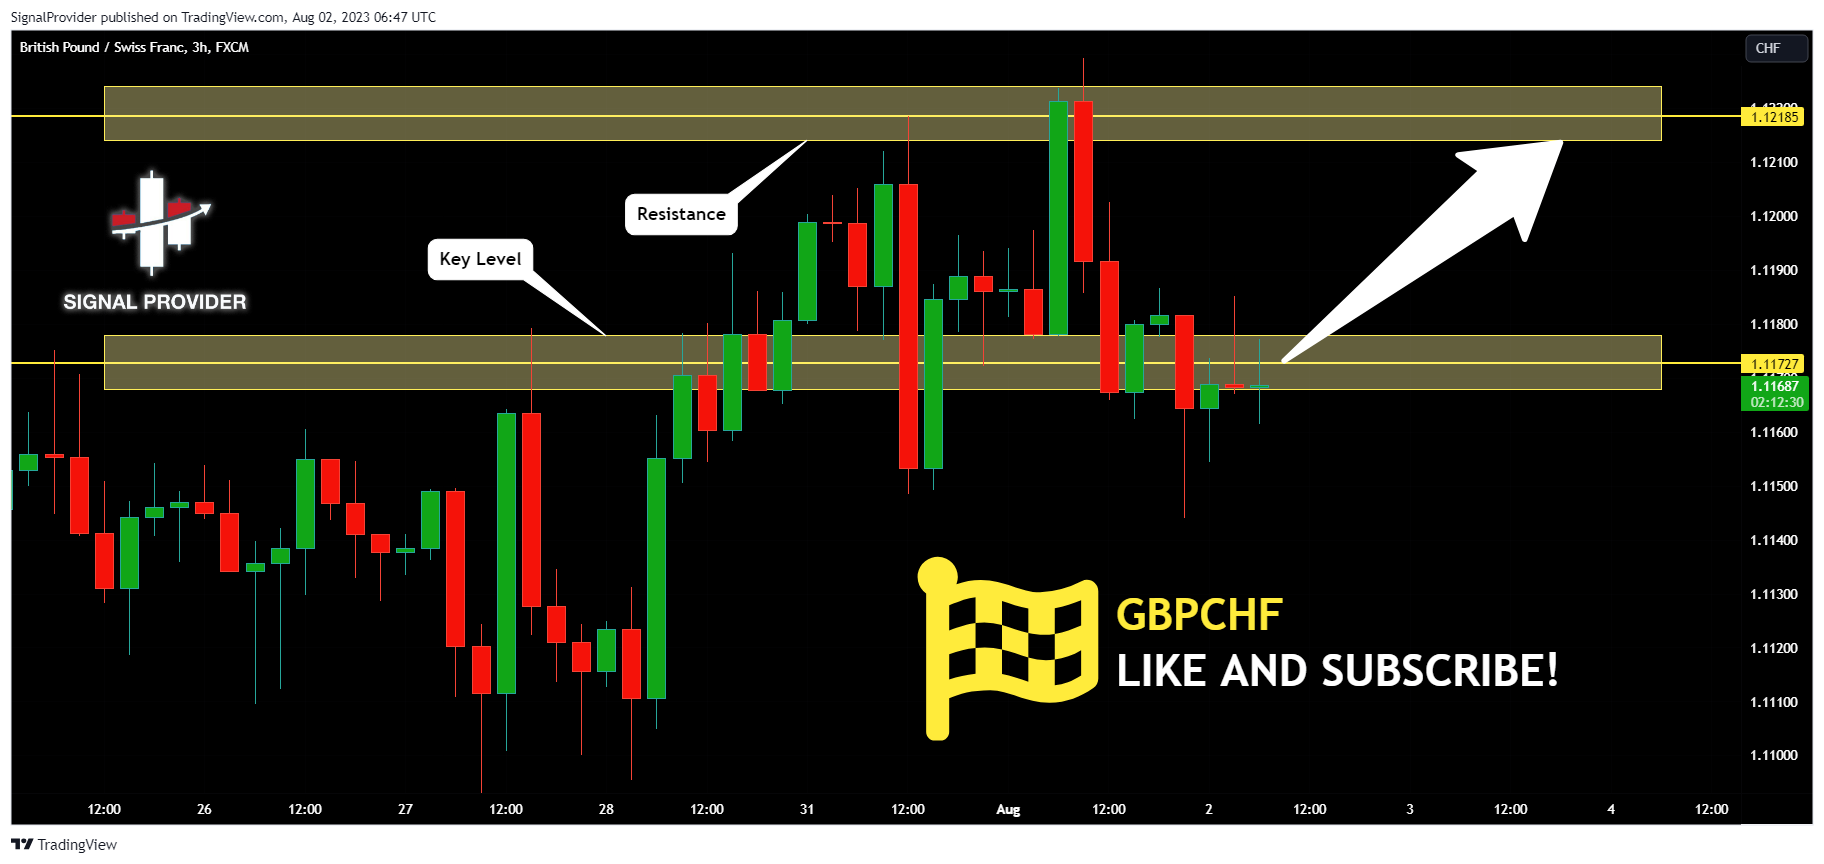 GBPCHF Will Go Higher From Support! Long!